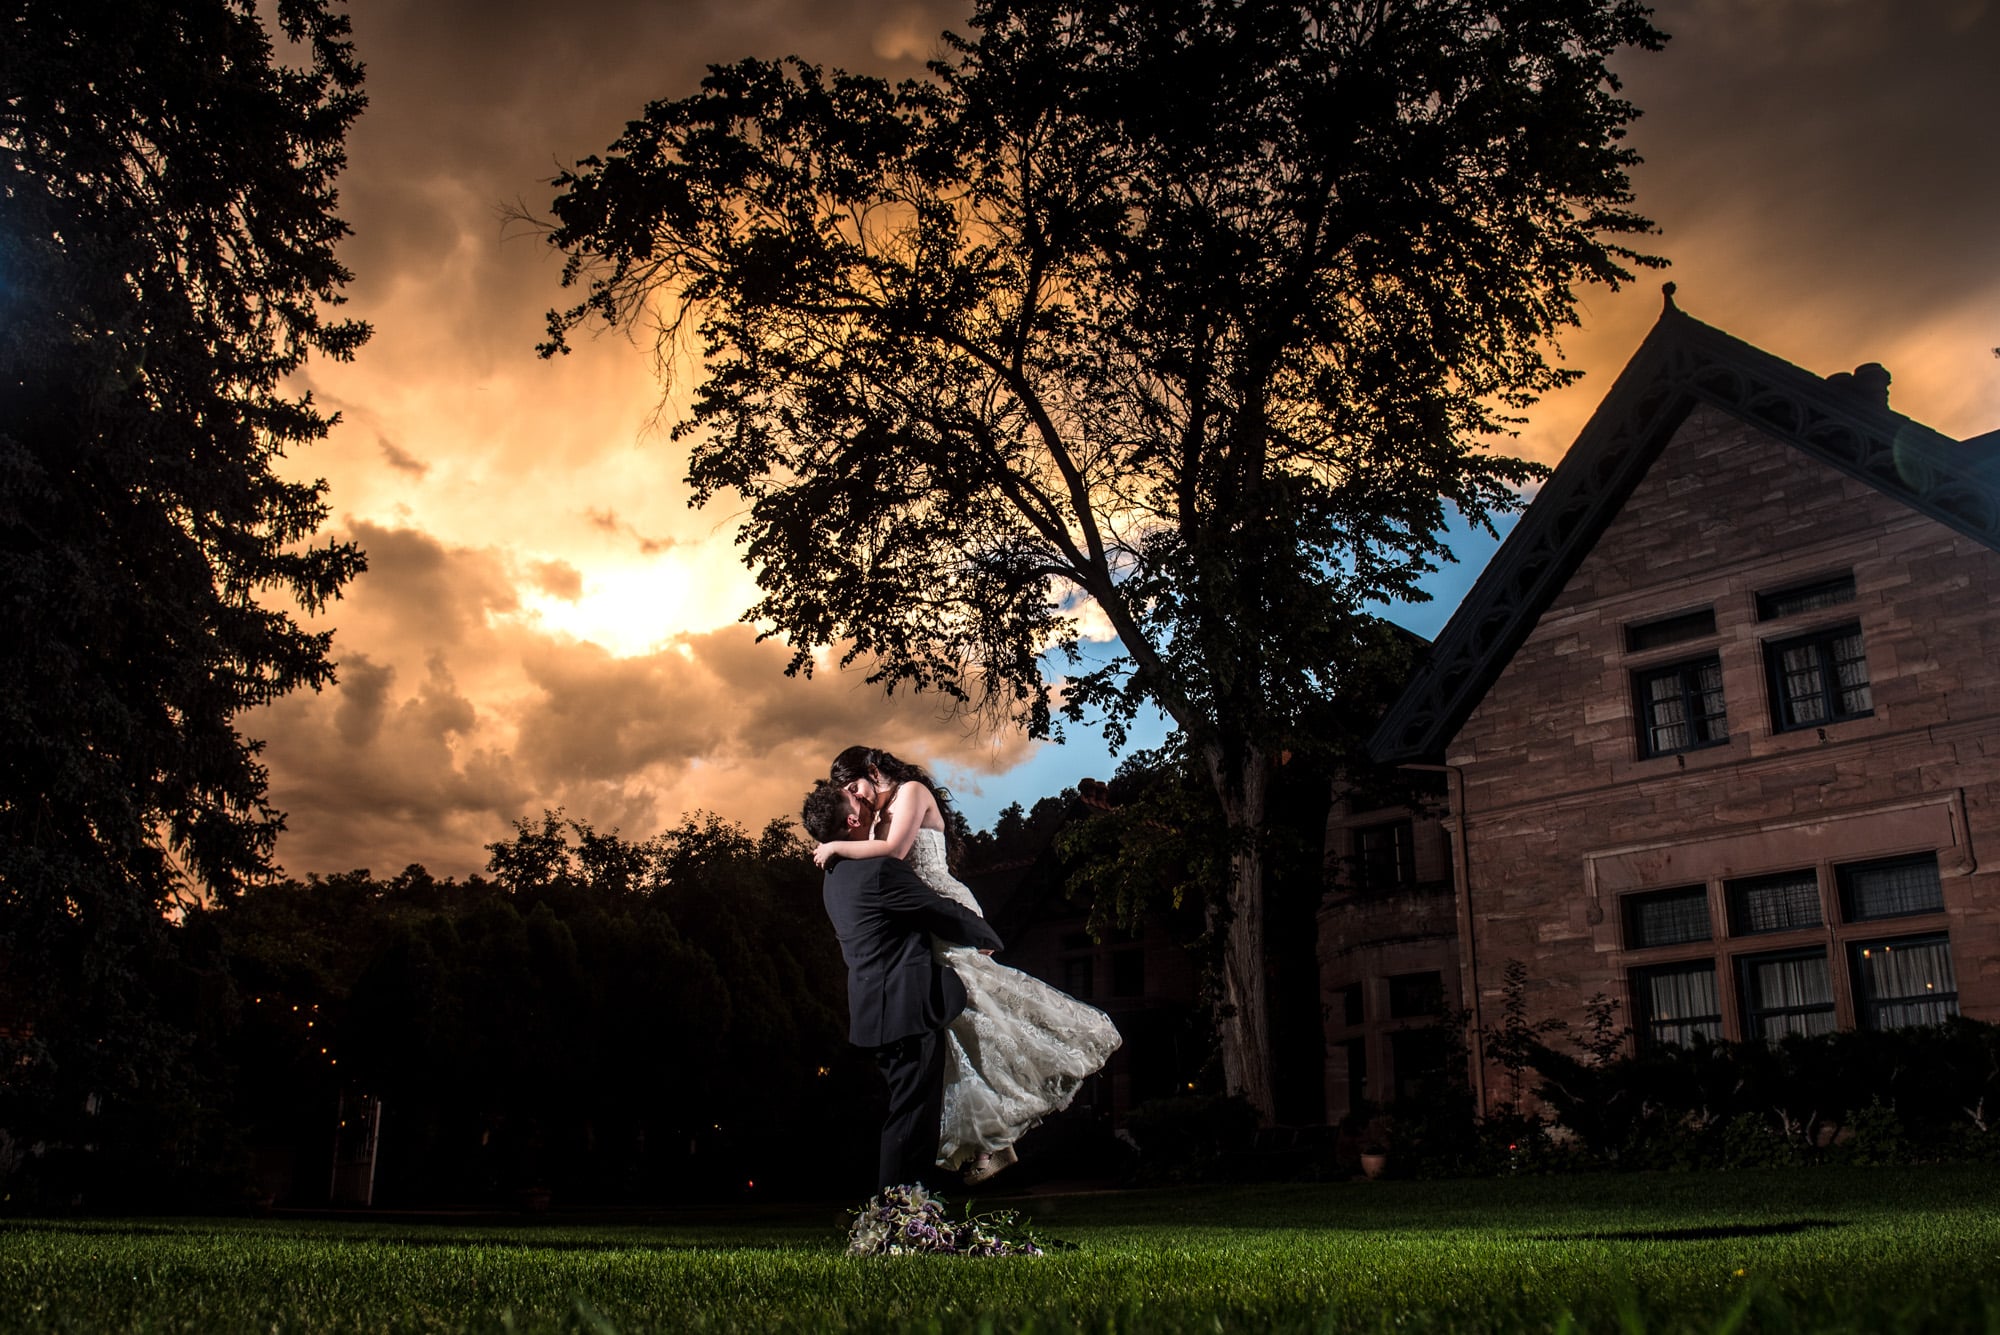 Weddings at The Briarhurst Manor - A bride and groom kissing at dusk.